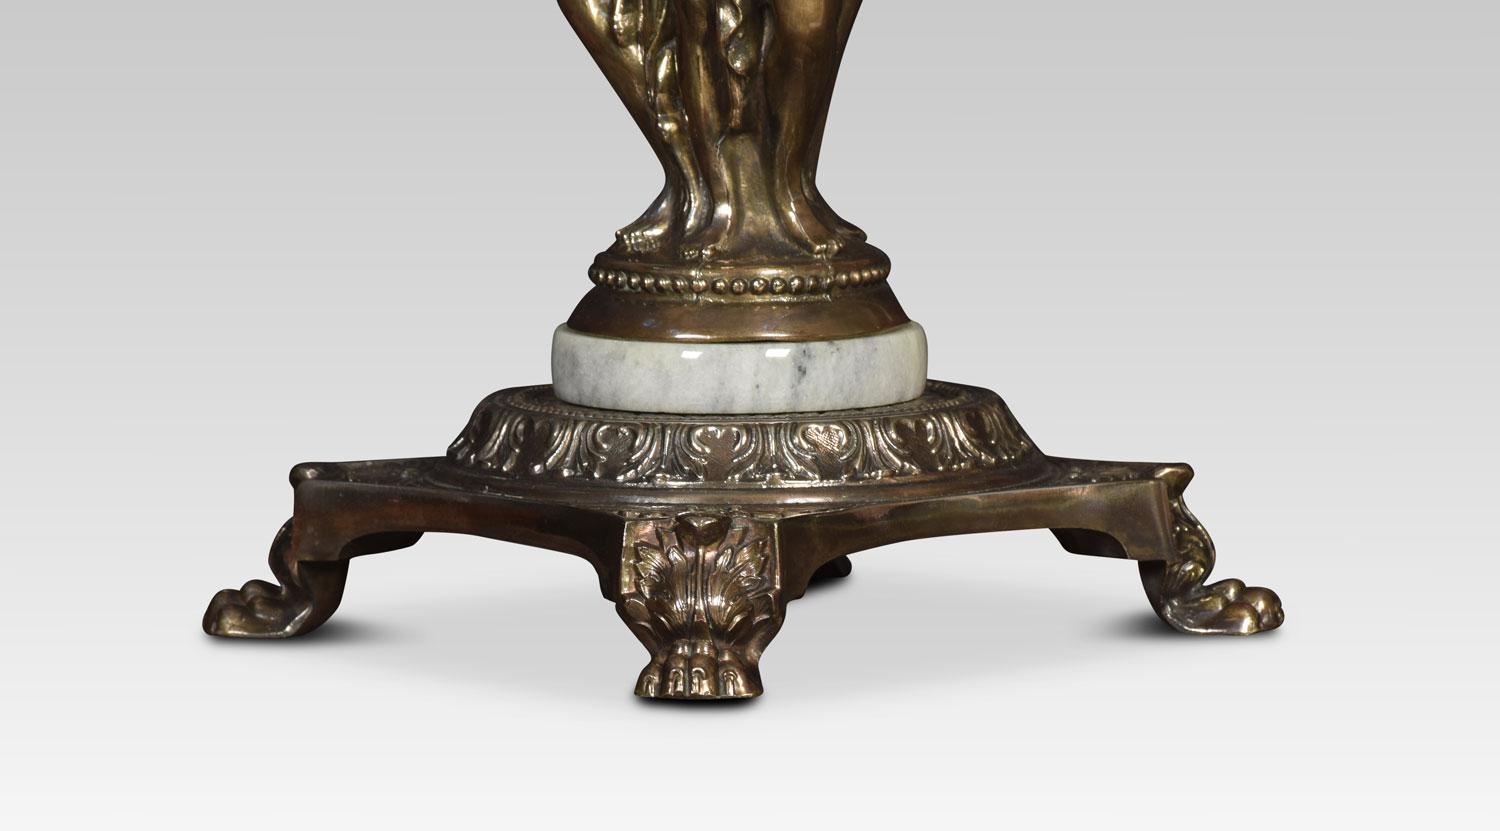 19th century spelter table lamp, the figural stem on shaped square base terminating in leaf caped paw feet.
Dimensions:
Height 18 inches
Width 8.5 inches
Depth 8.5 inches.